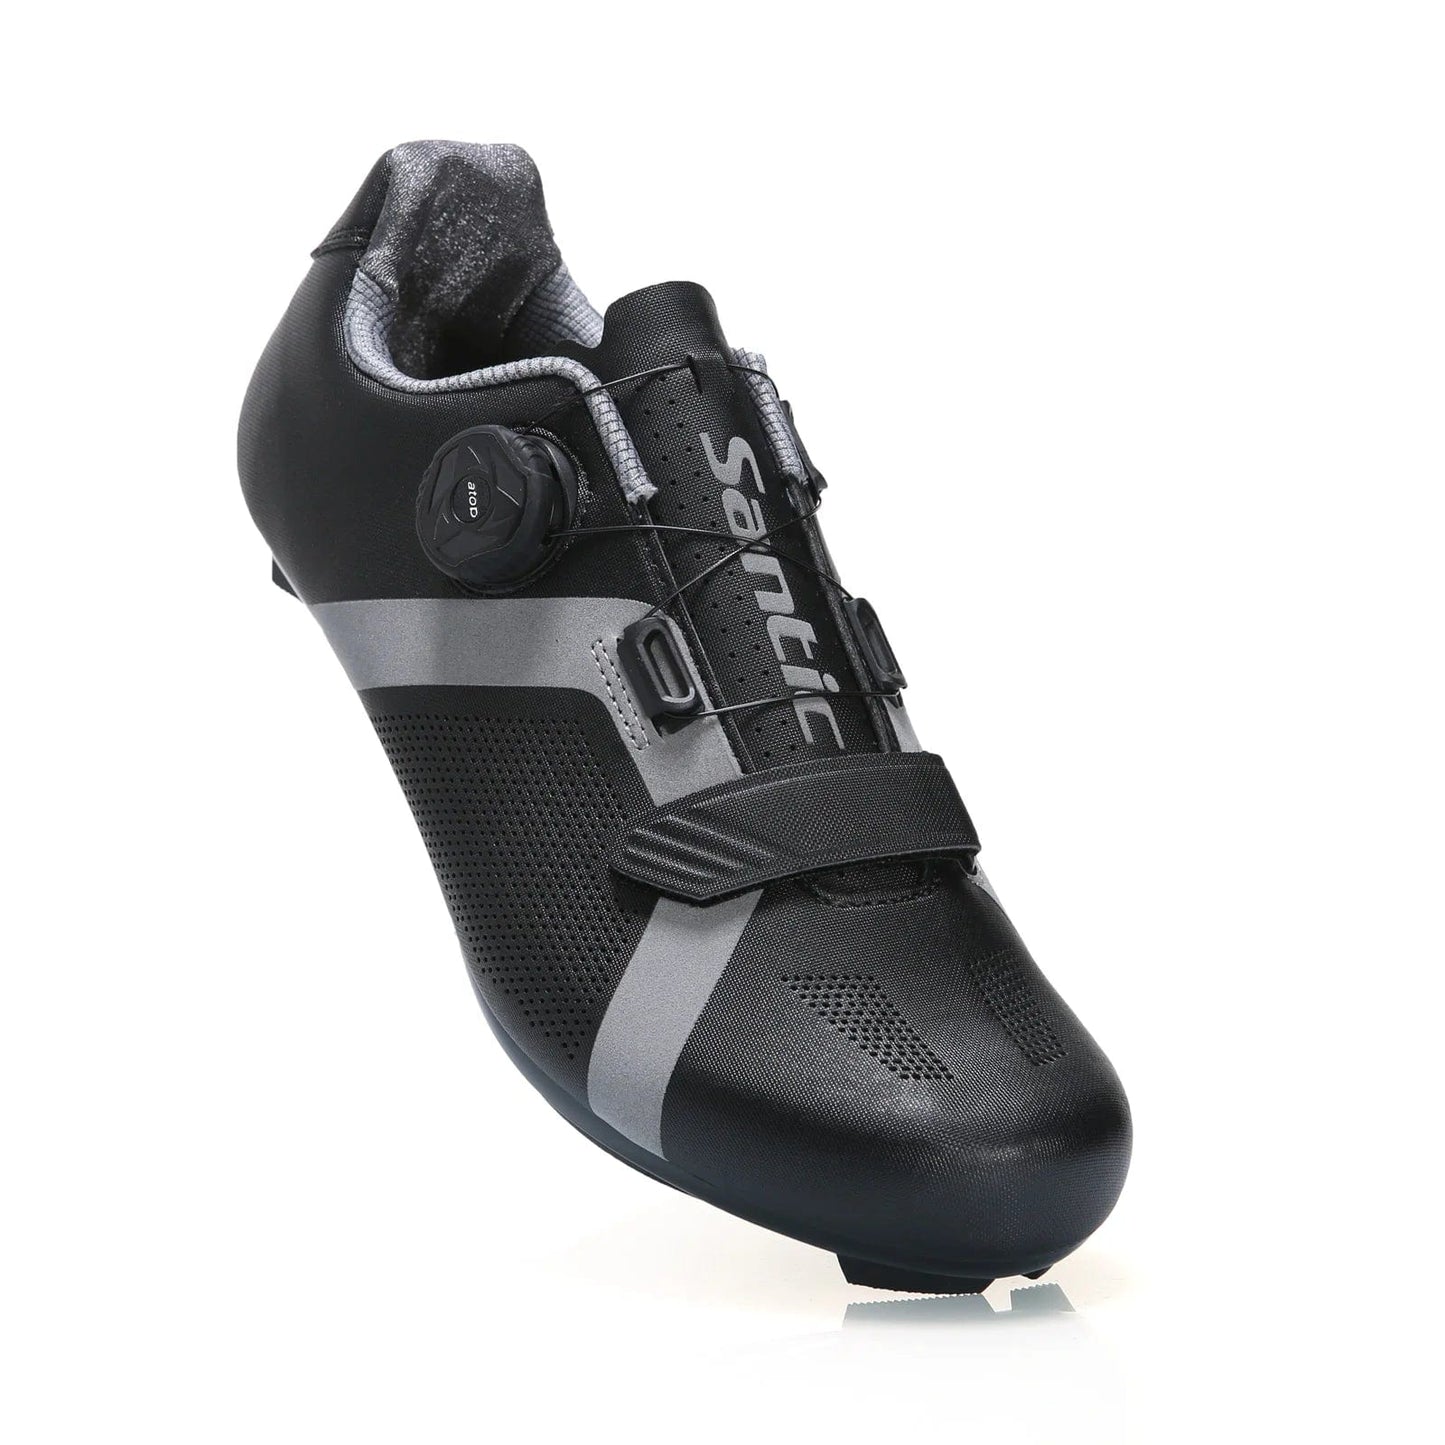 Chaussures cyclisme Swift Spin SANTIC KS200